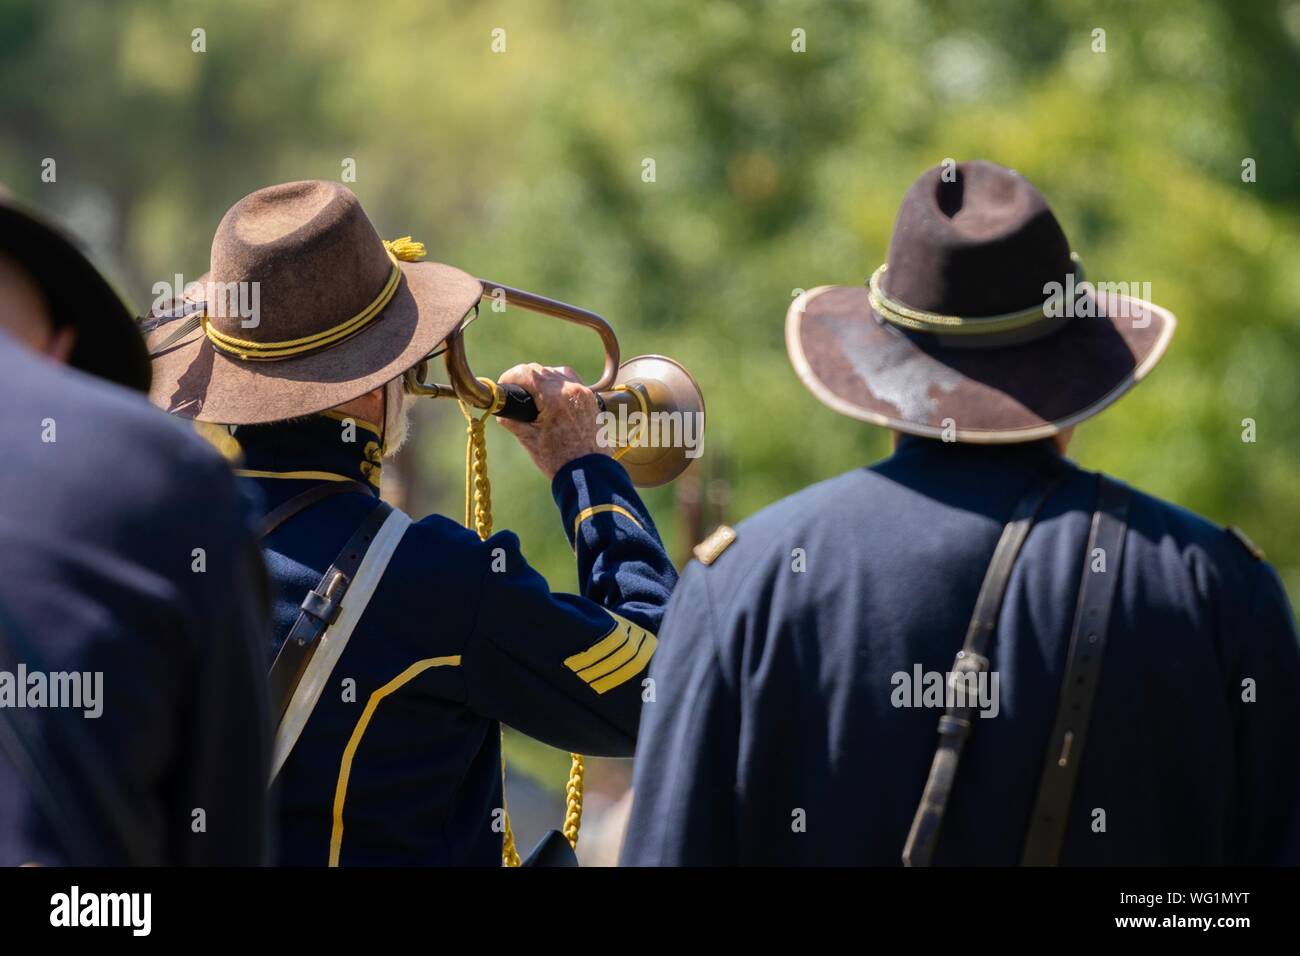 A man plays the trumpet at the end of a battle during an American Civil War reenactment Stock Photo